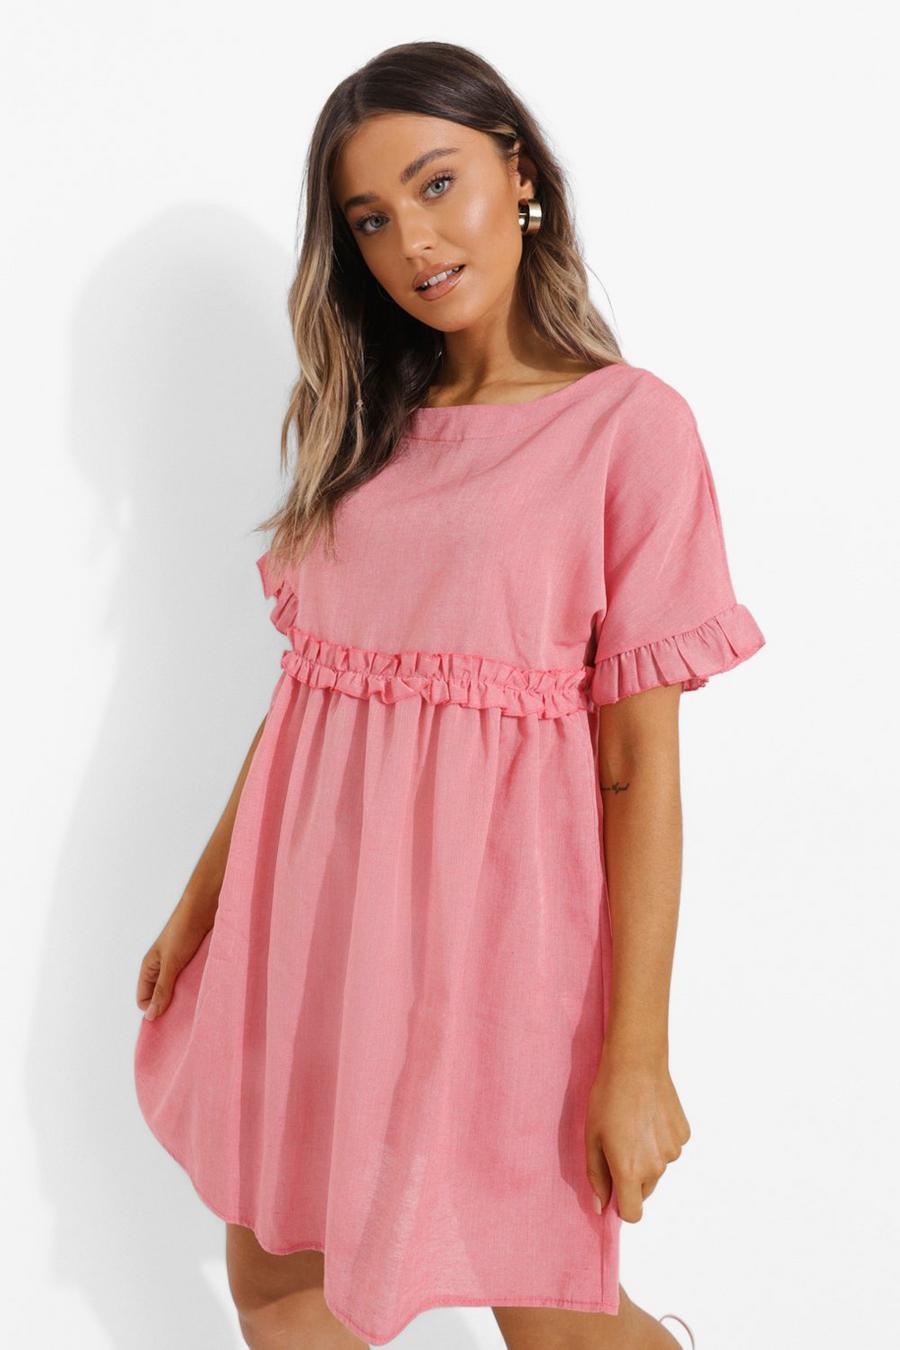 Coral pink Linen Look Ruffle Smock Dress